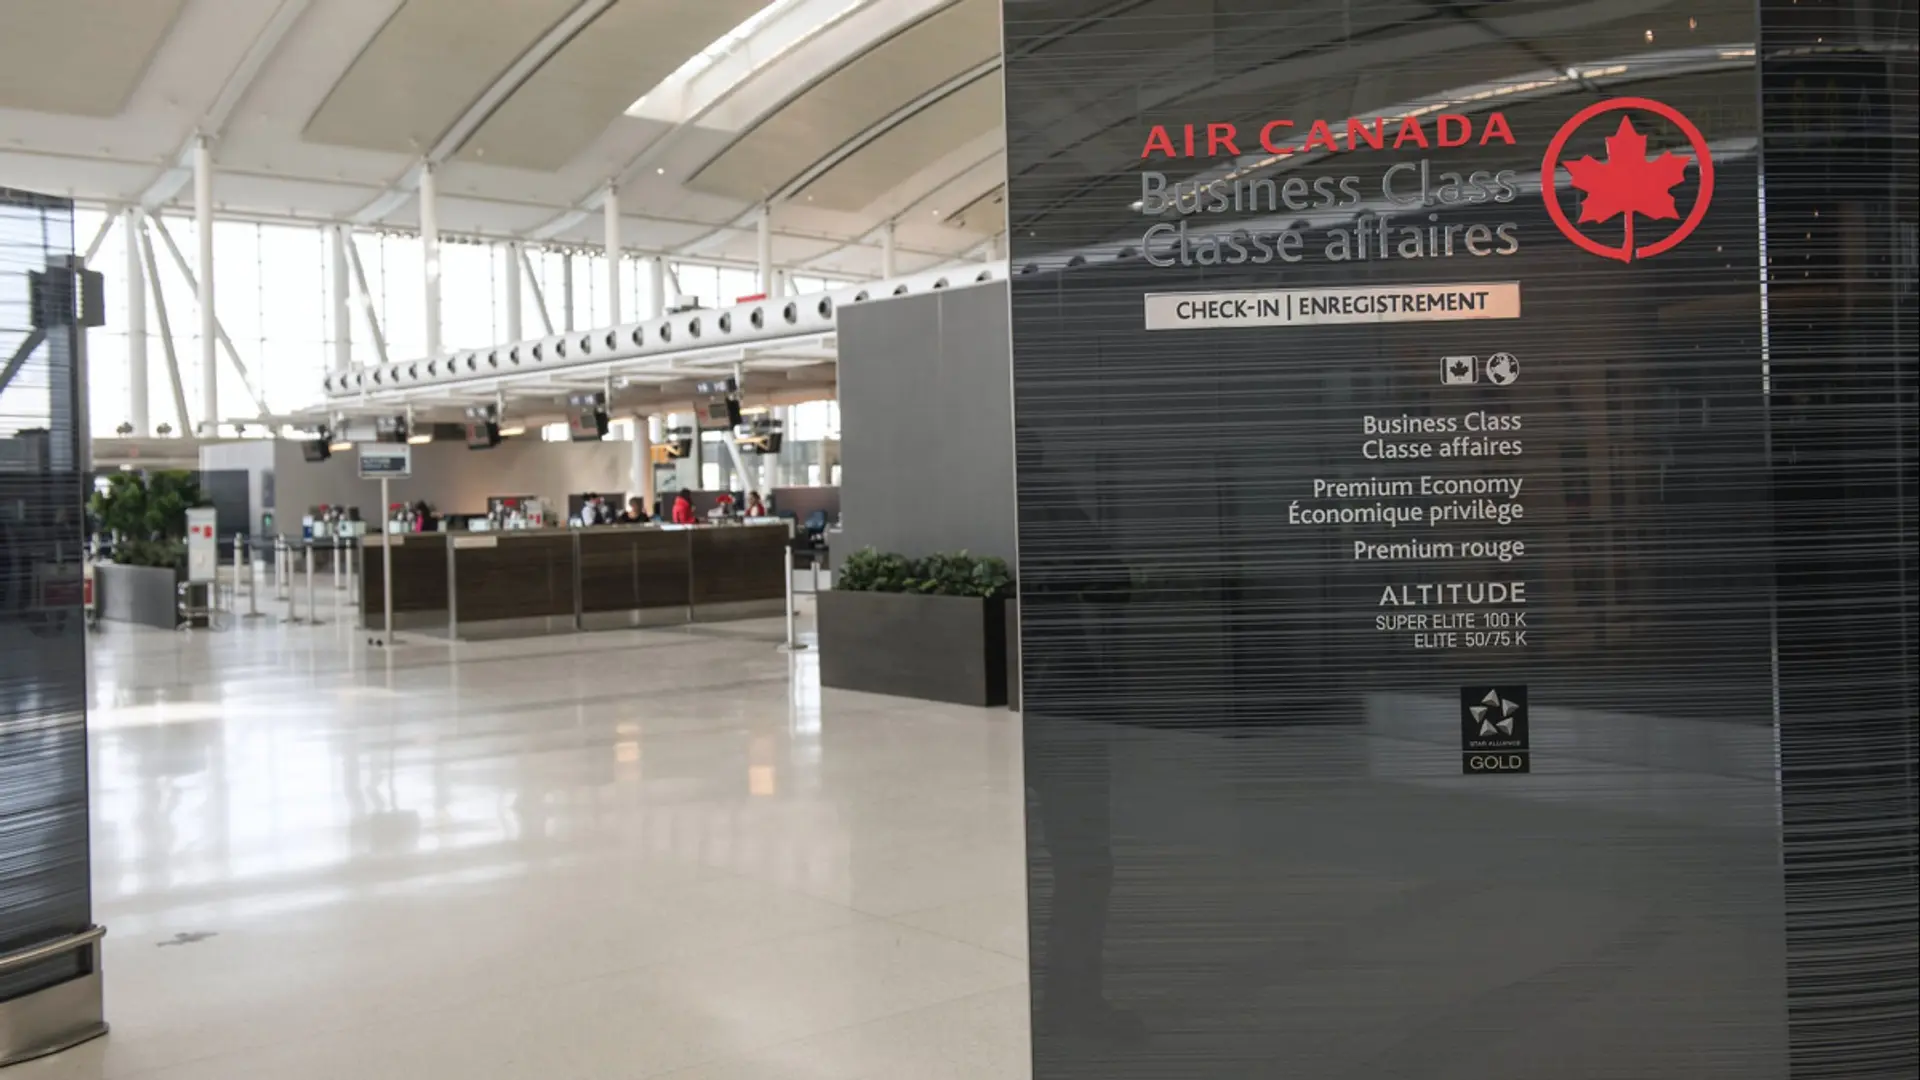 Airline review Airport experience - Air Canada - 1